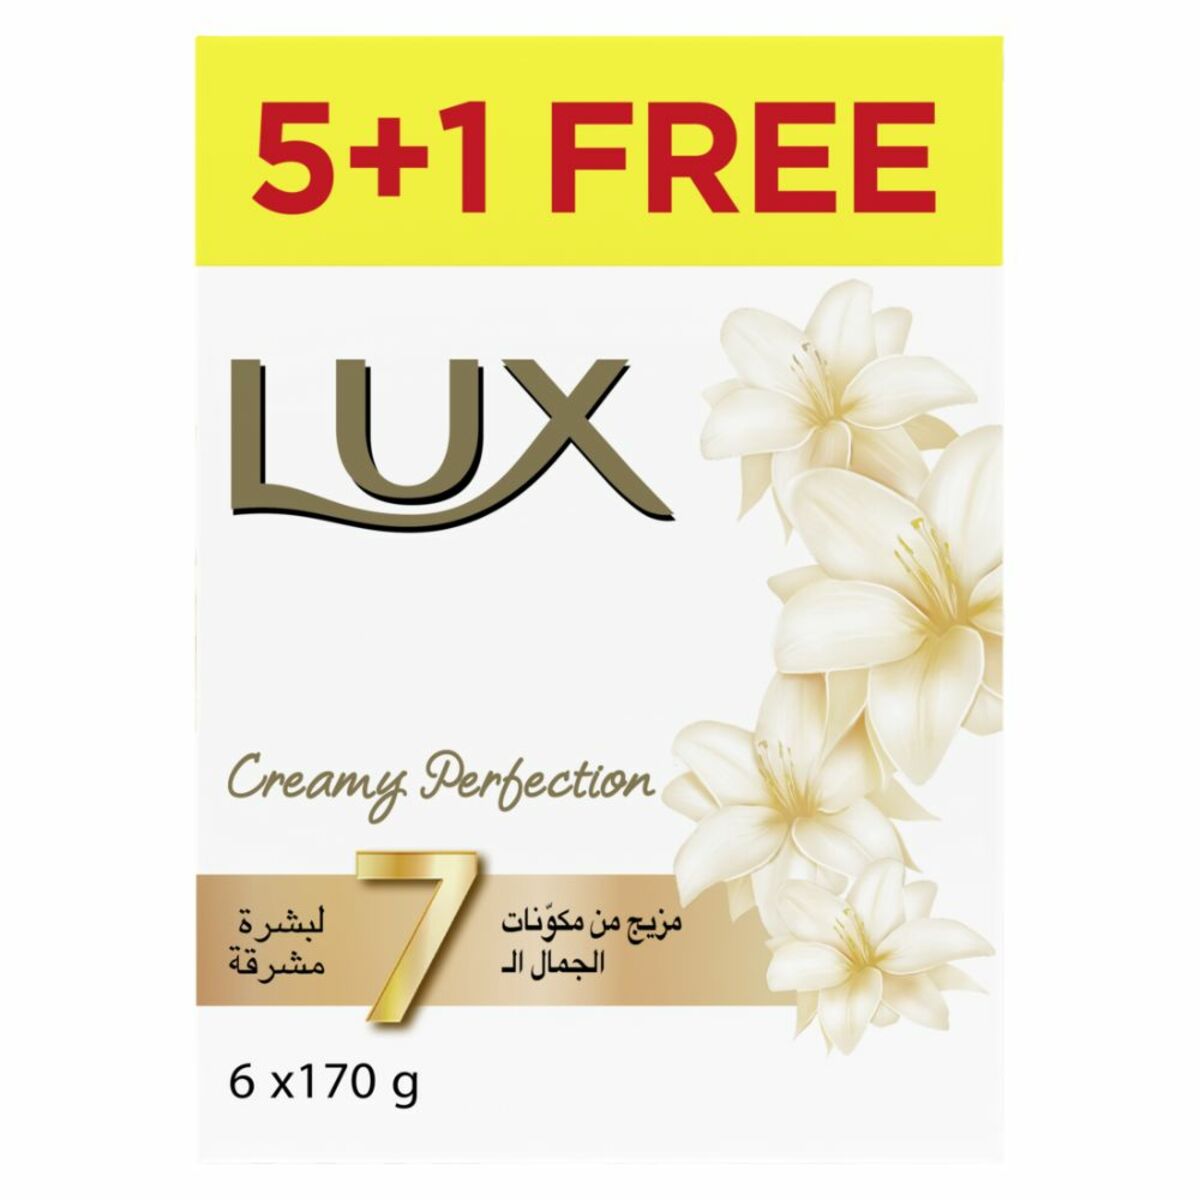 Lux Creamy Perfection Bar Soap 170 g 5+1